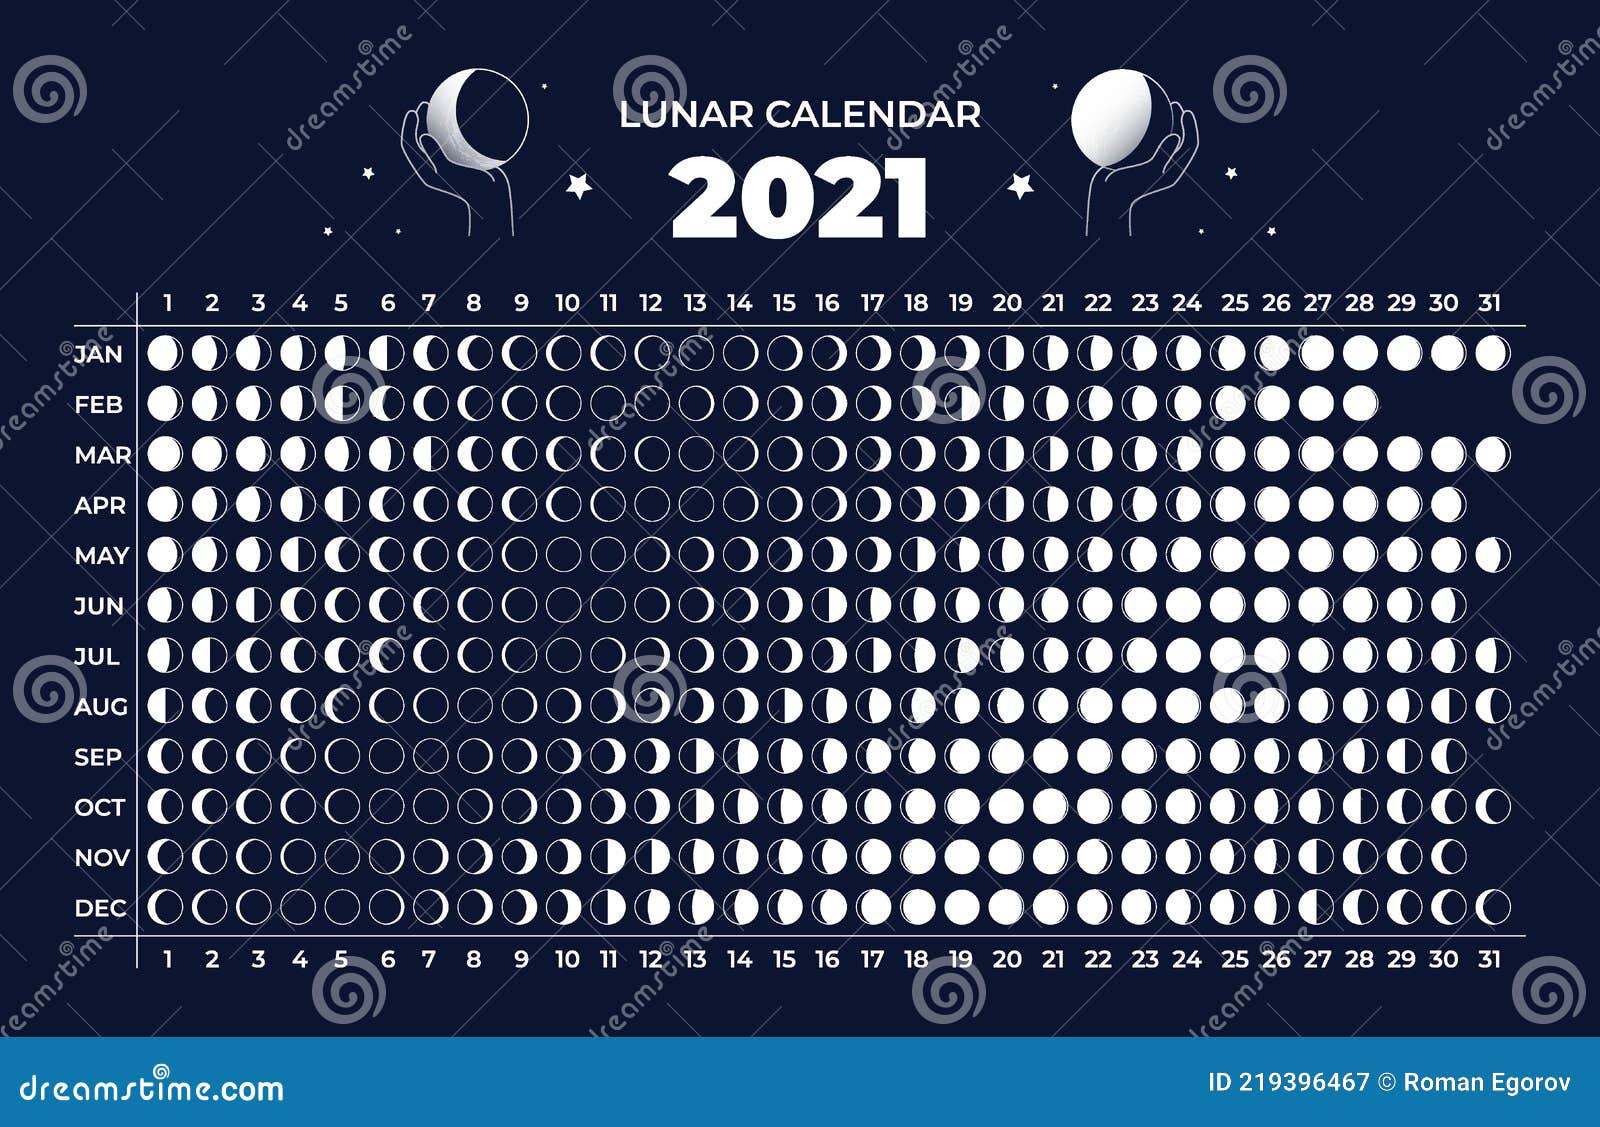 Moon Calendar Astrology 2021 Lunar Cycle Celestial Astronomy Scheme Phase Change In Different Months Of Year Stock Vector Illustration Of Time Cycle 219396467